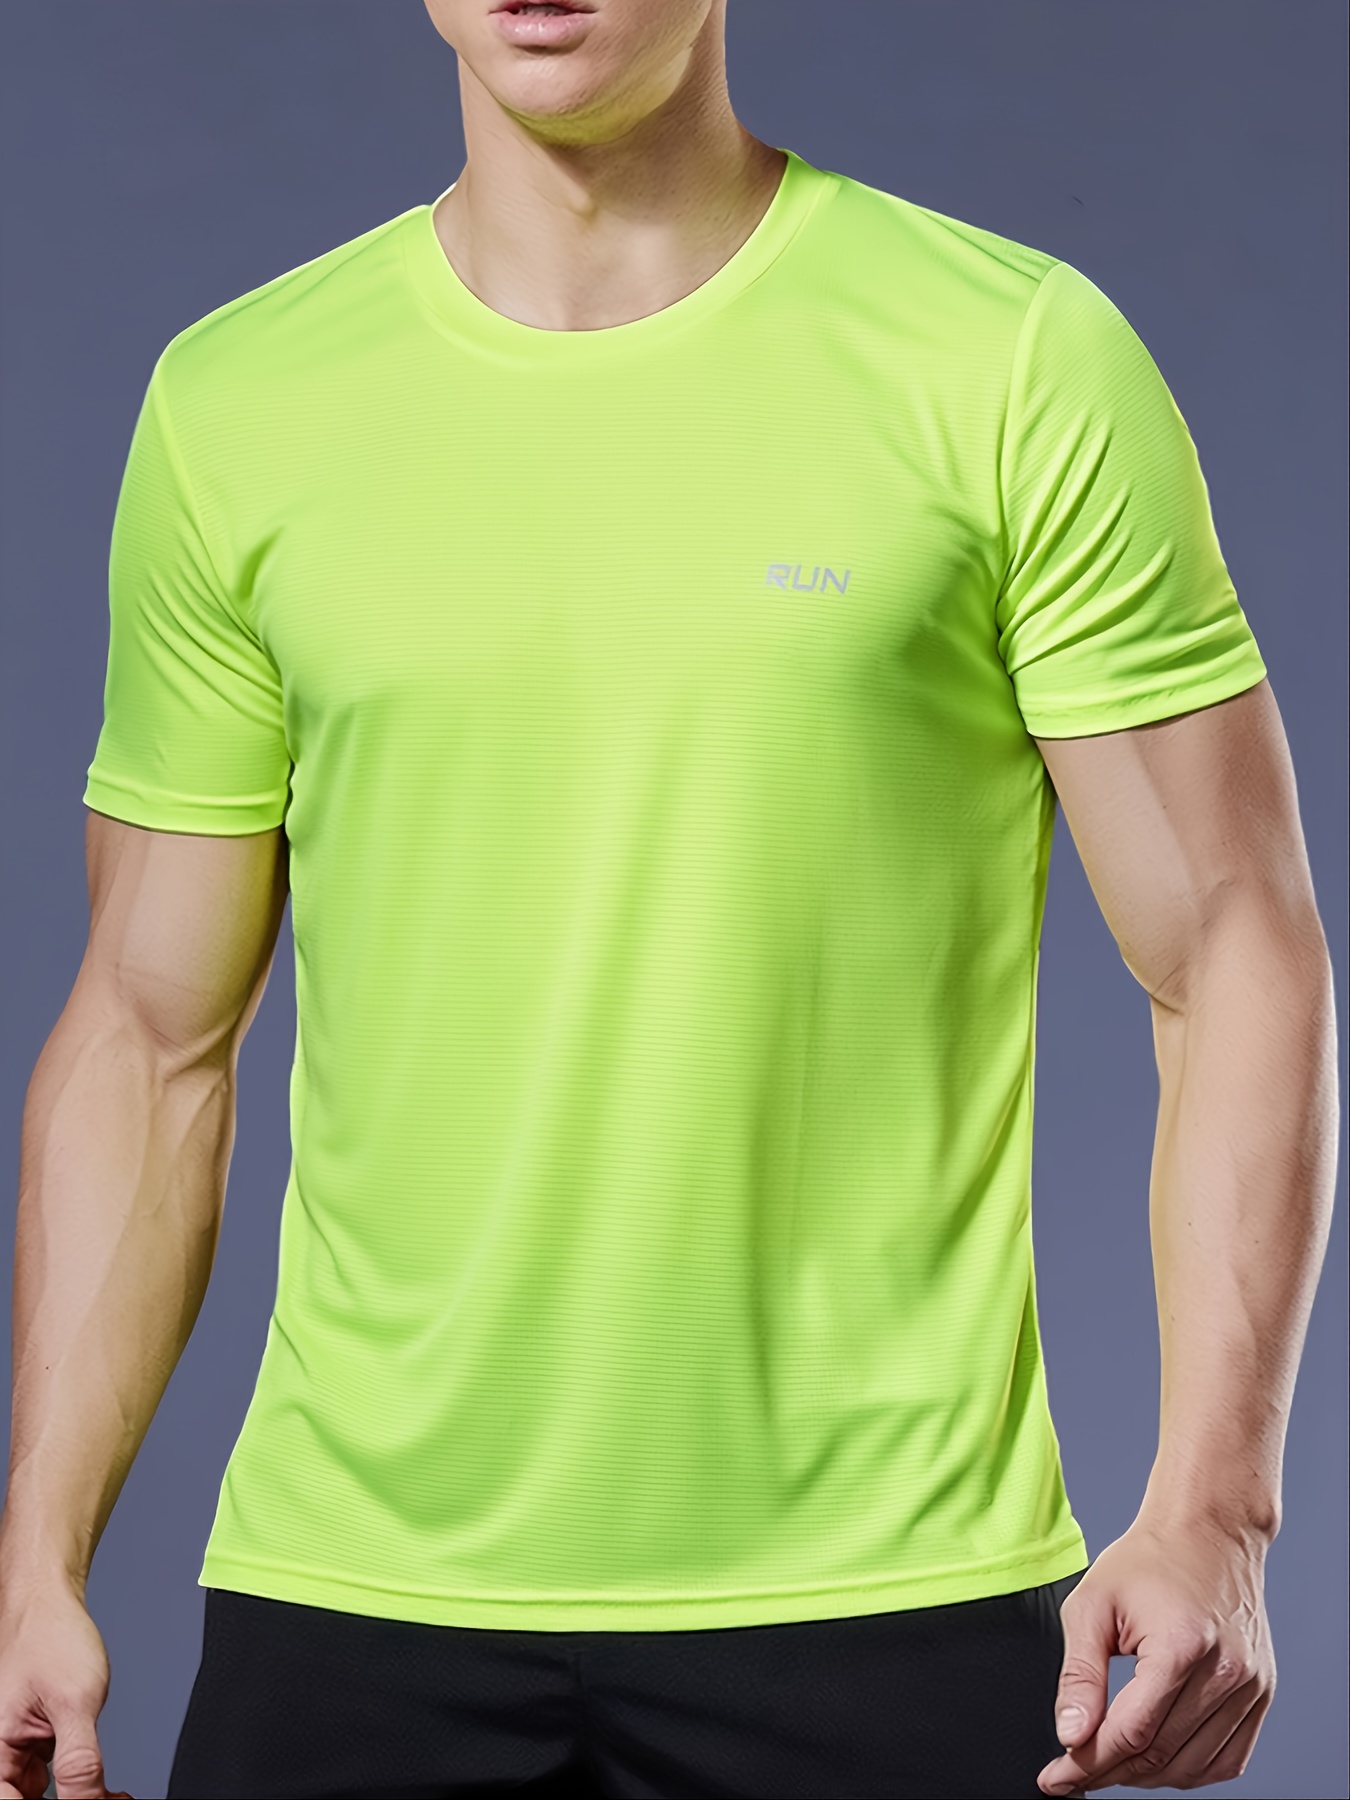 Men Casual Summer Jersey Short Sleeve Quick Drying T-Shirt Bodybuilding  Elasticity Basketball Clothes Fitness Gym T Shirt